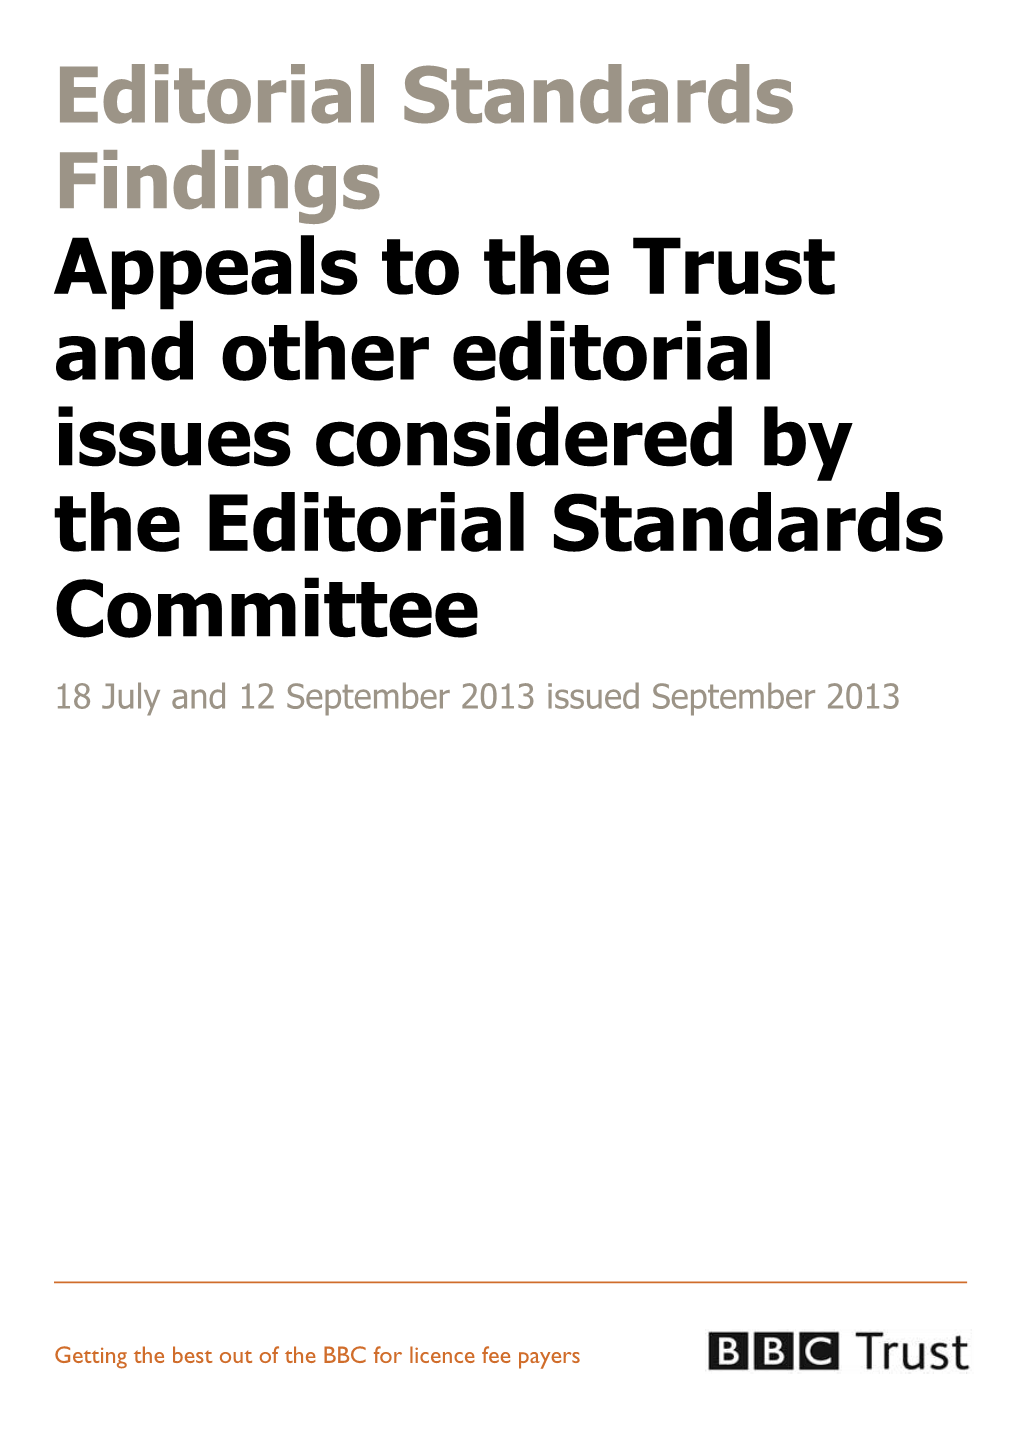 Editorial Standards Findings Appeals to the Trust and Other